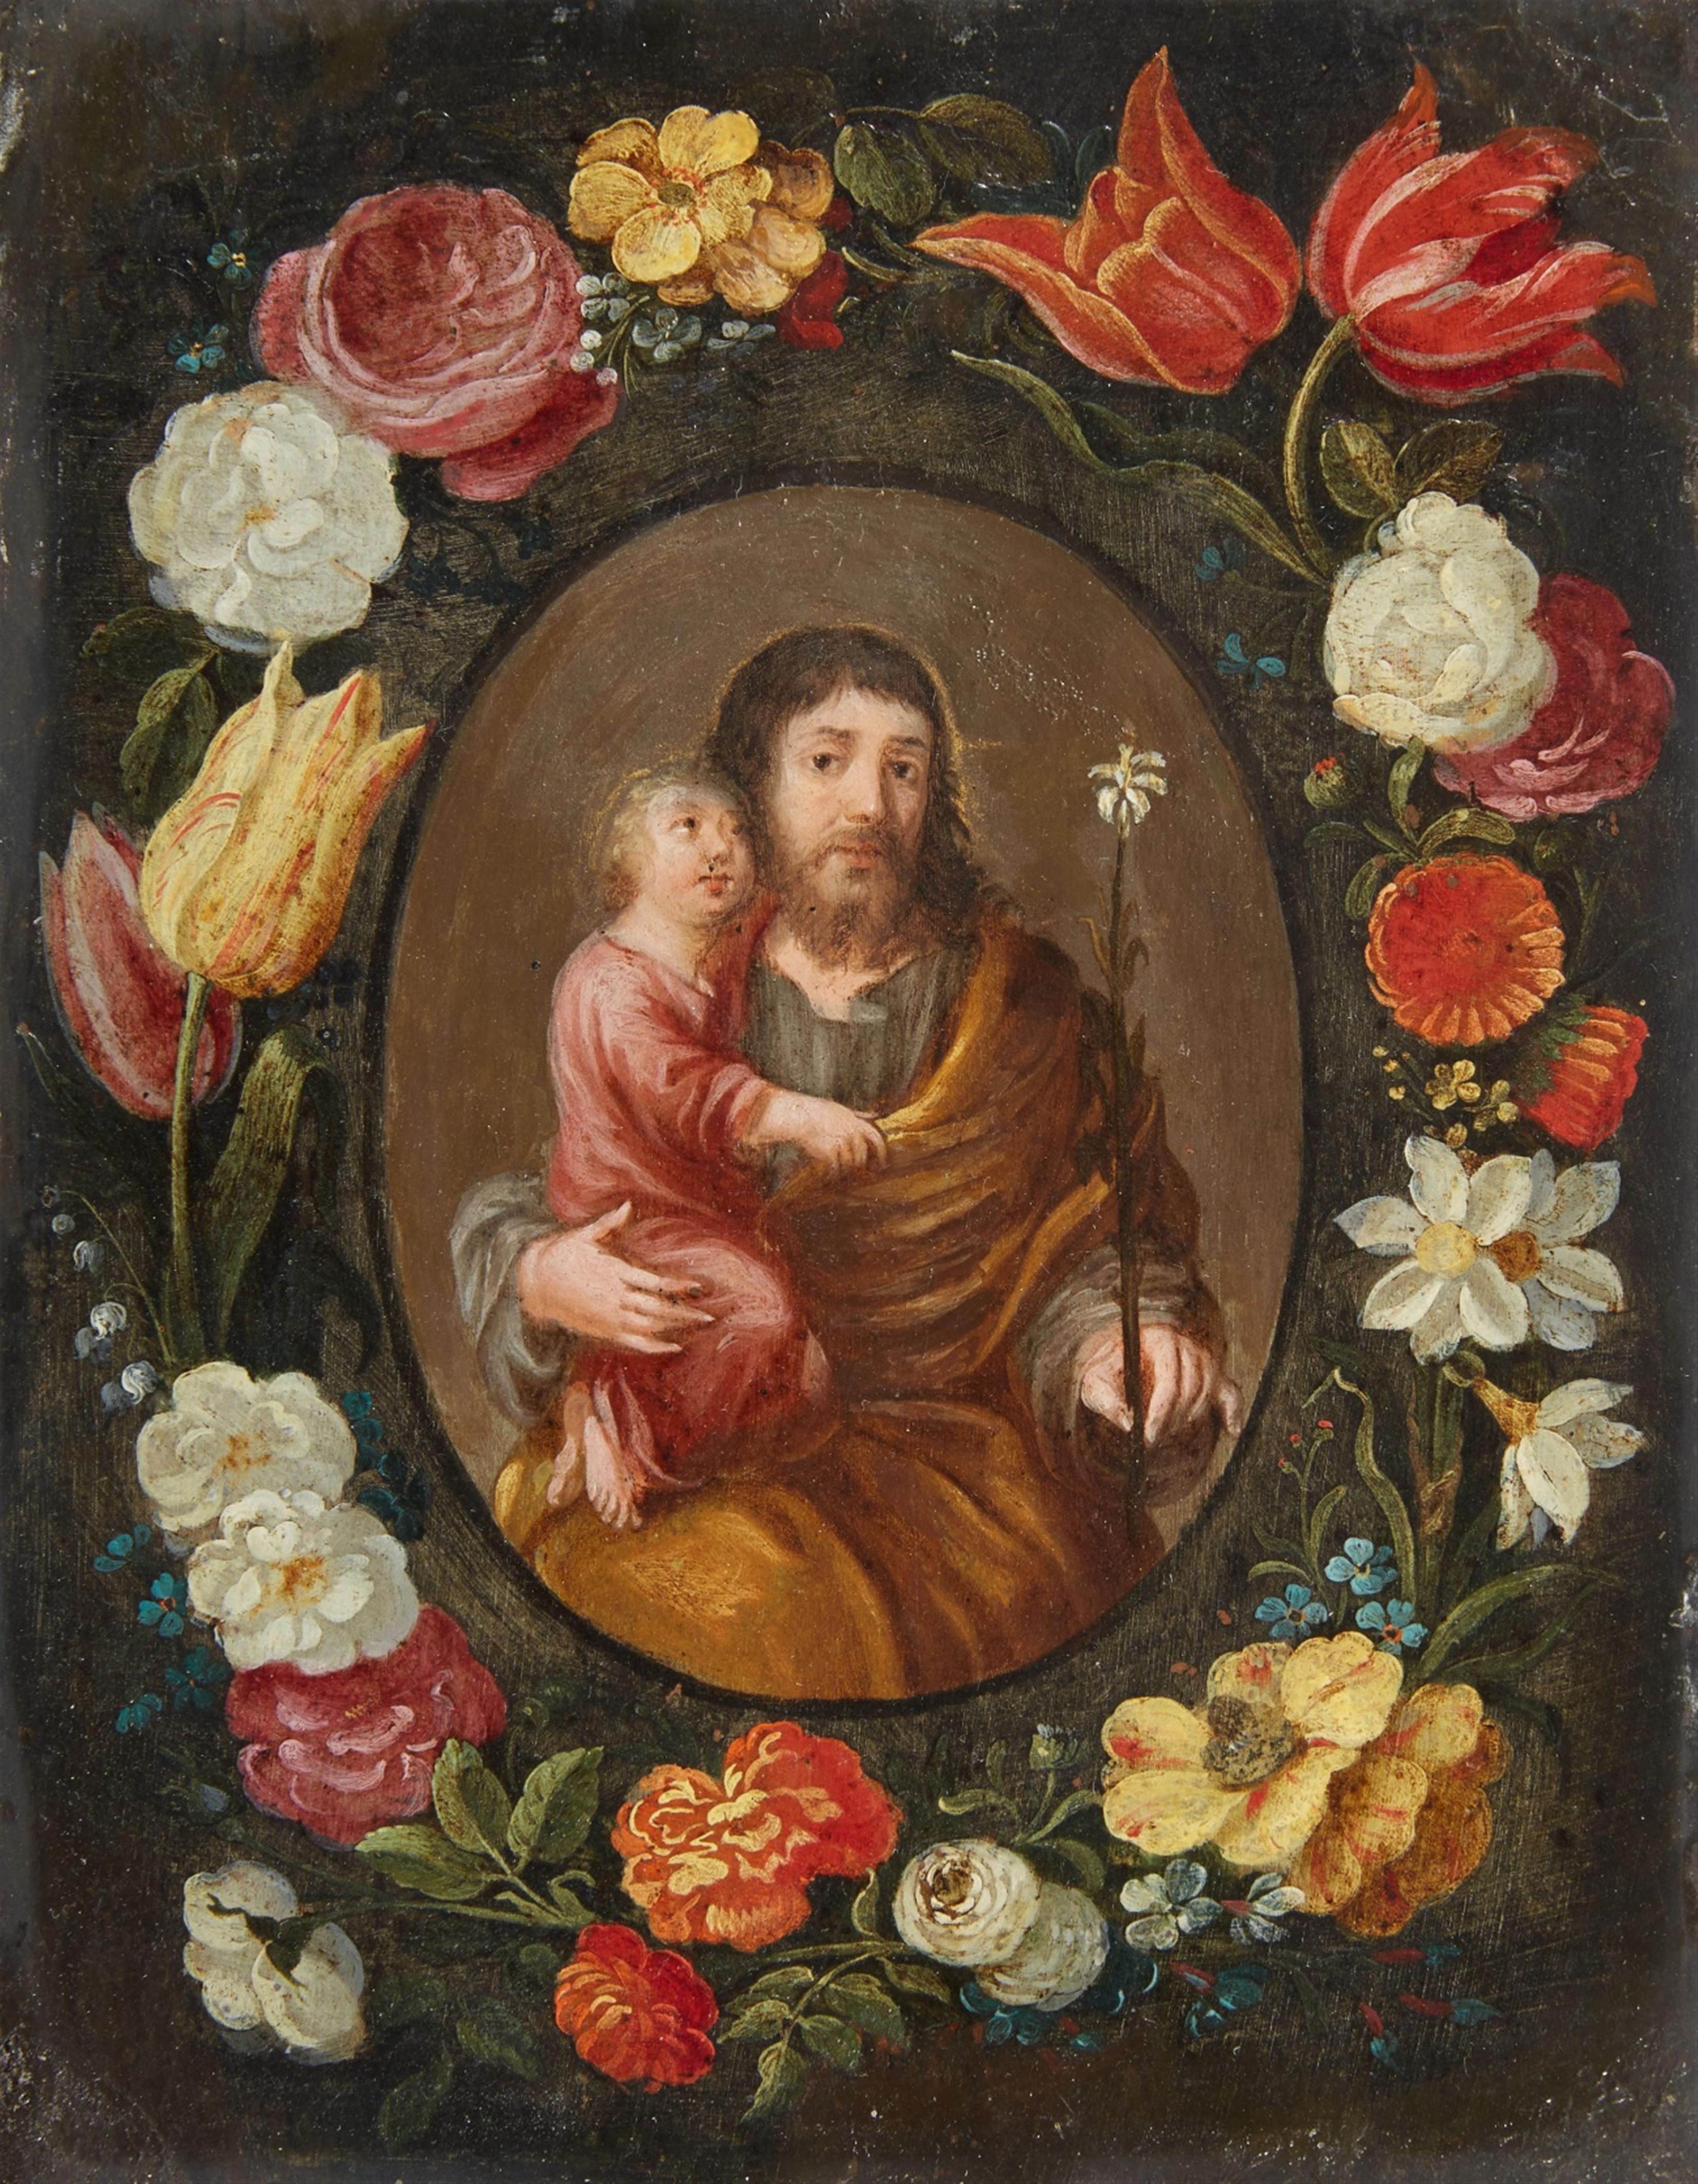 Flemish School of the 17th century - Saint Joseph and the Christ Child in a Floral Wreath - image-1